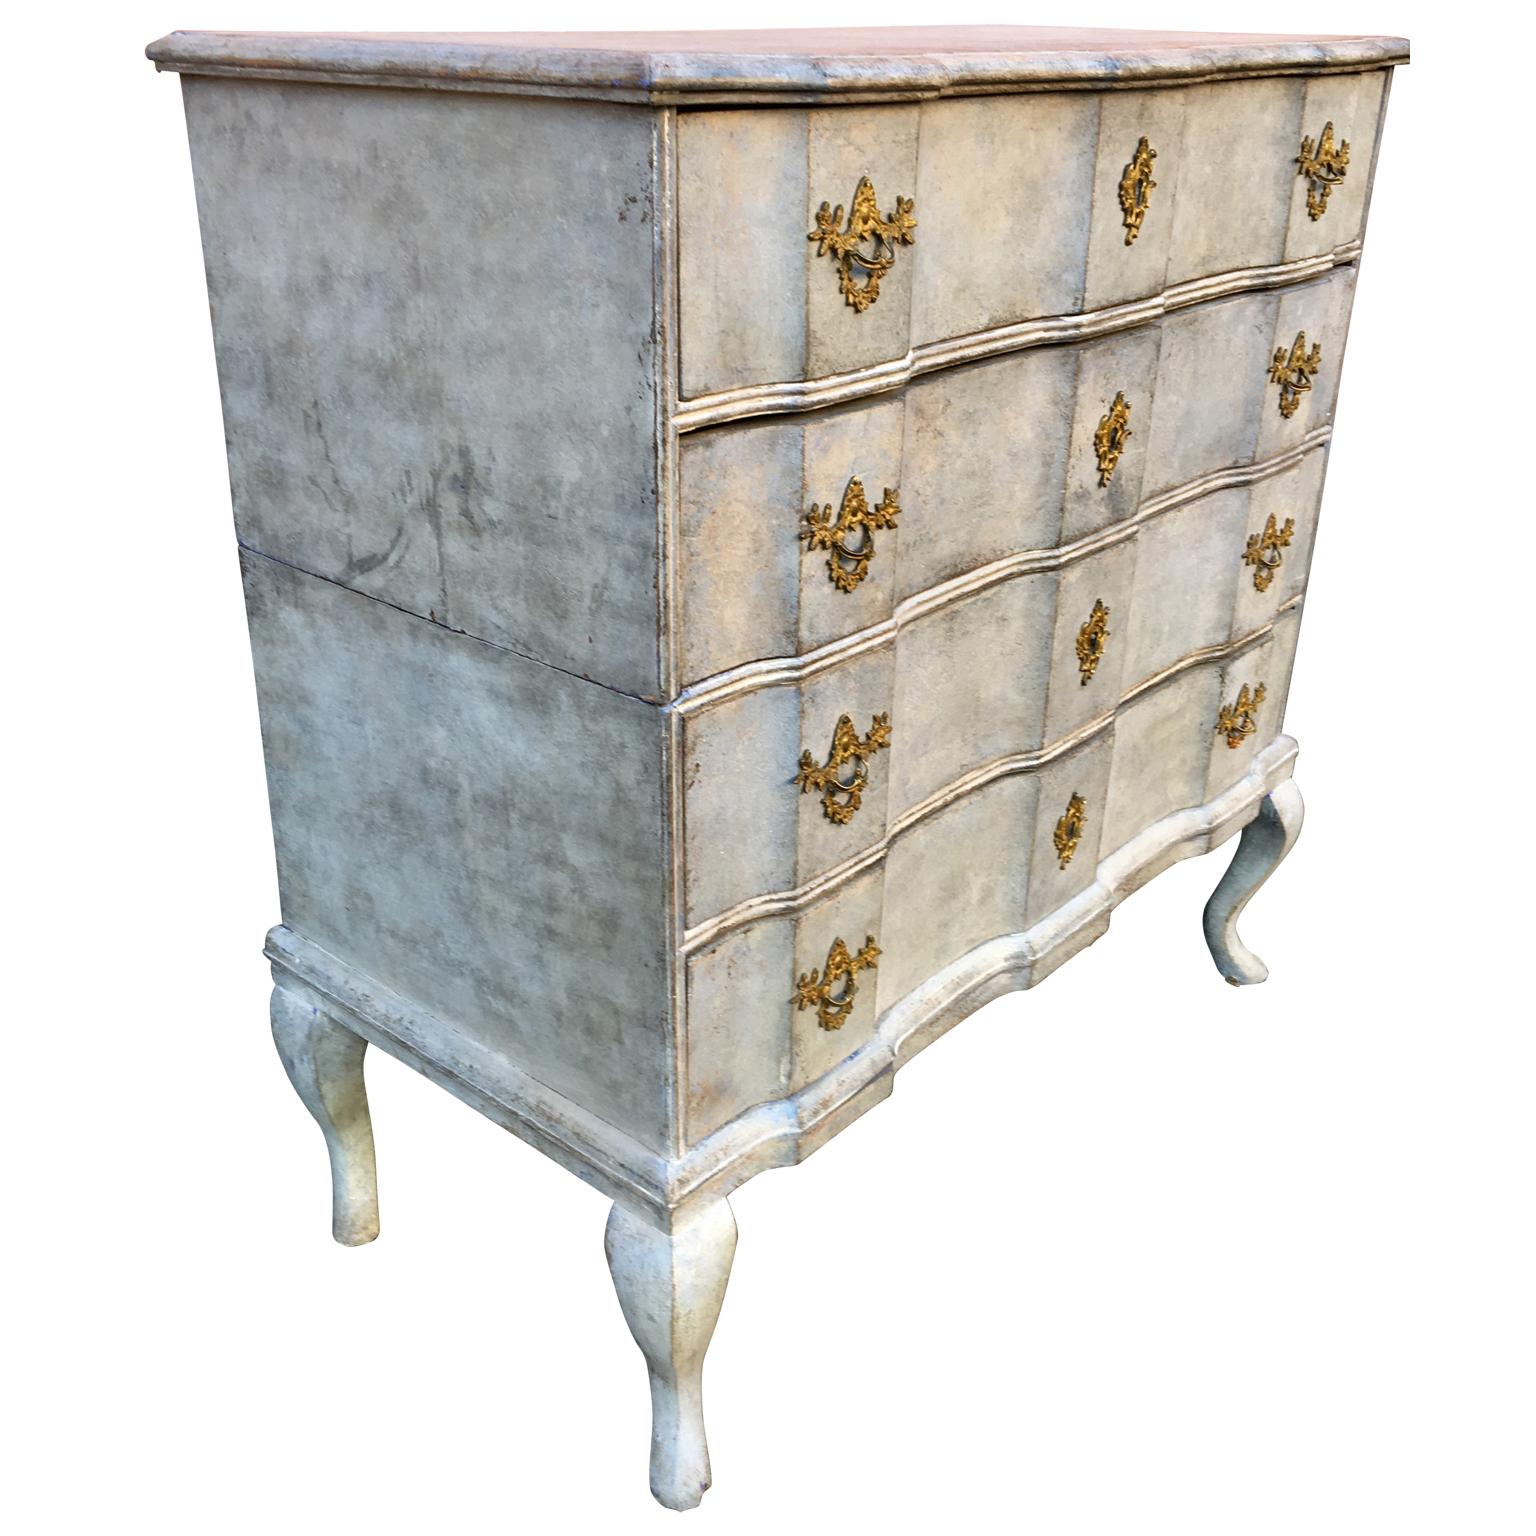 18th century light blue painted baroque chest of drawers from Southern Sweden or Denmark.
In the early 18th century the Southern regions of Halland, Skåne and Blekinge were still part of the Royal Kingdom of Denmark. Those are the regions where the